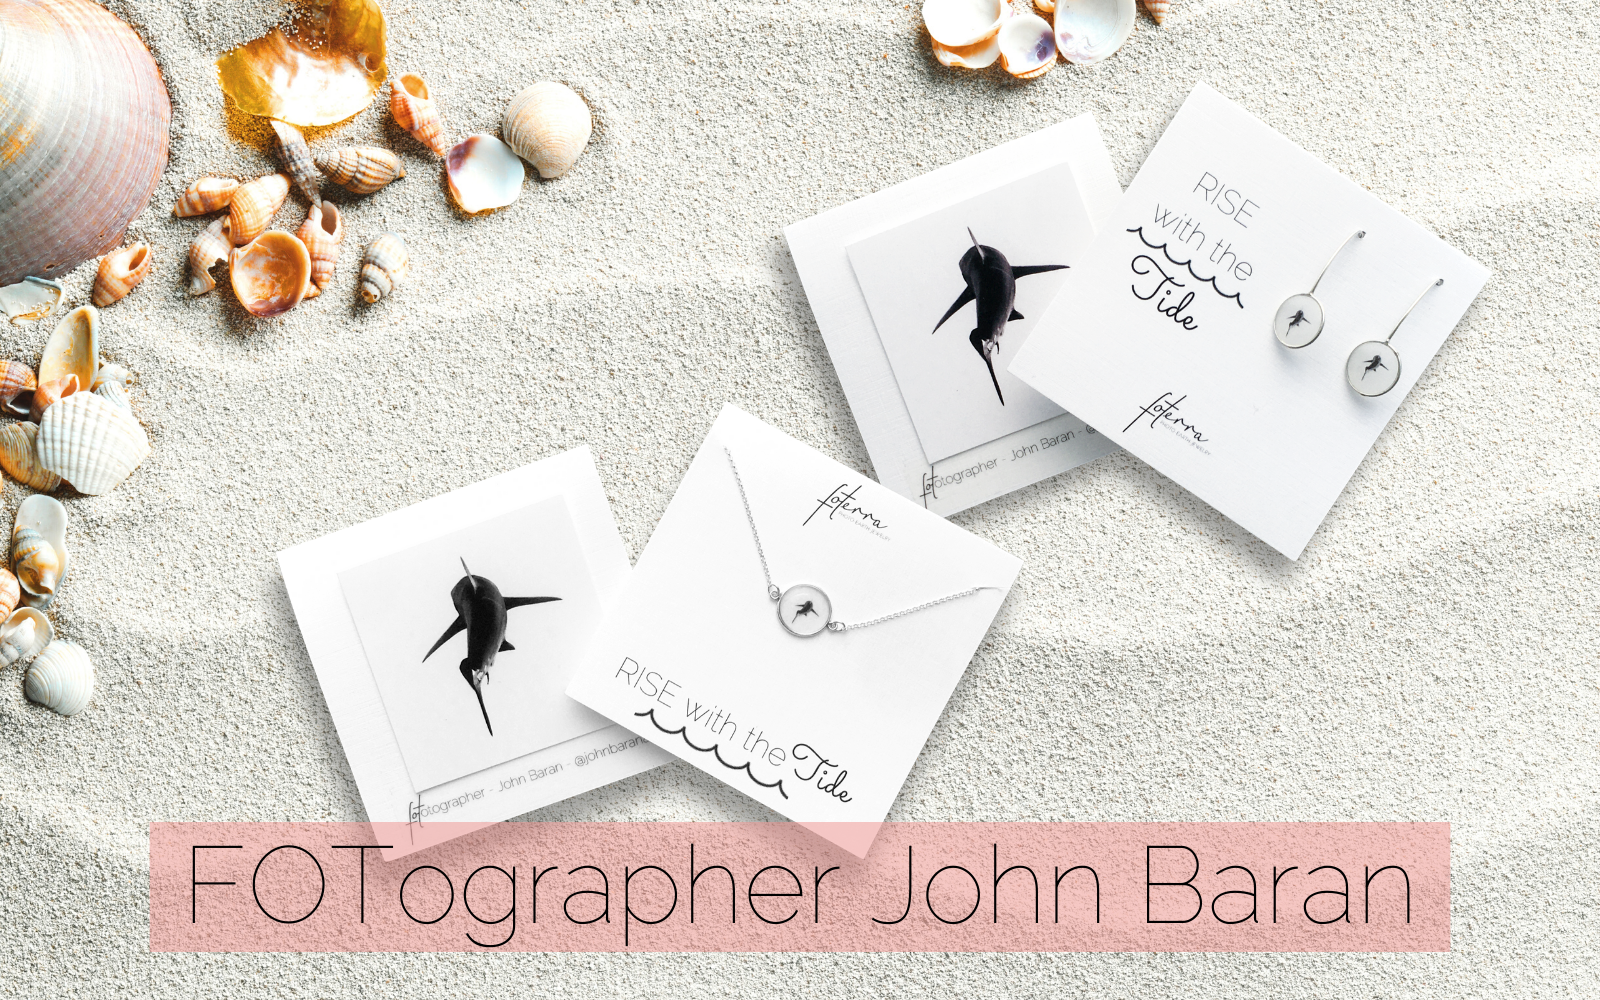 New Photo Jewelry Collection by Fotographer John Baran